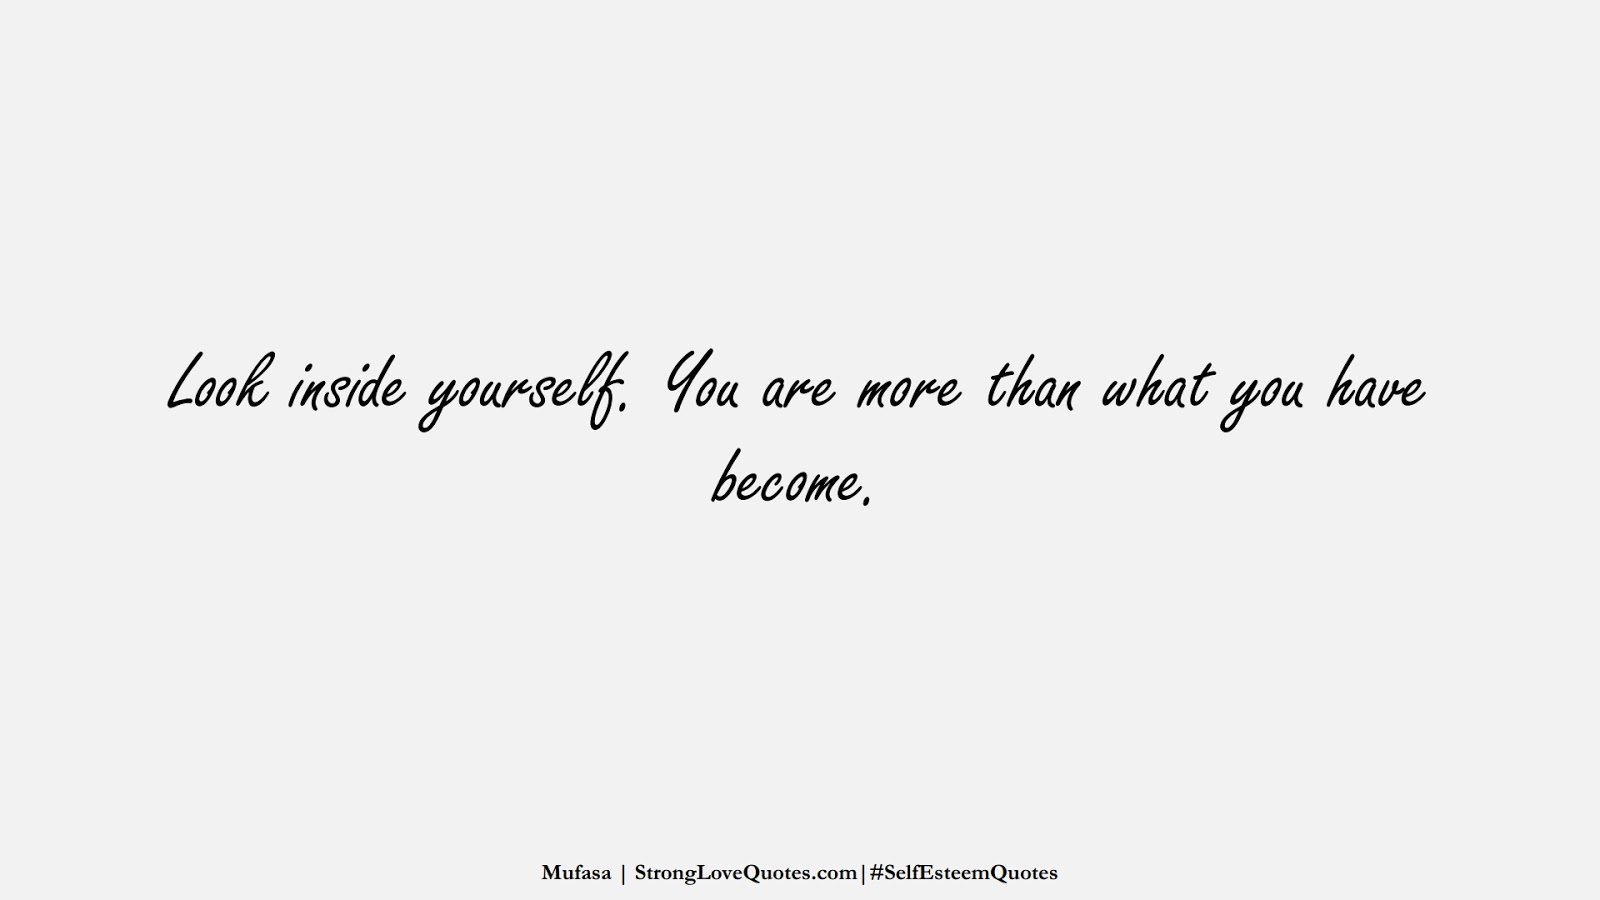 Look inside yourself. You are more than what you have become. (Mufasa);  #SelfEsteemQuotes